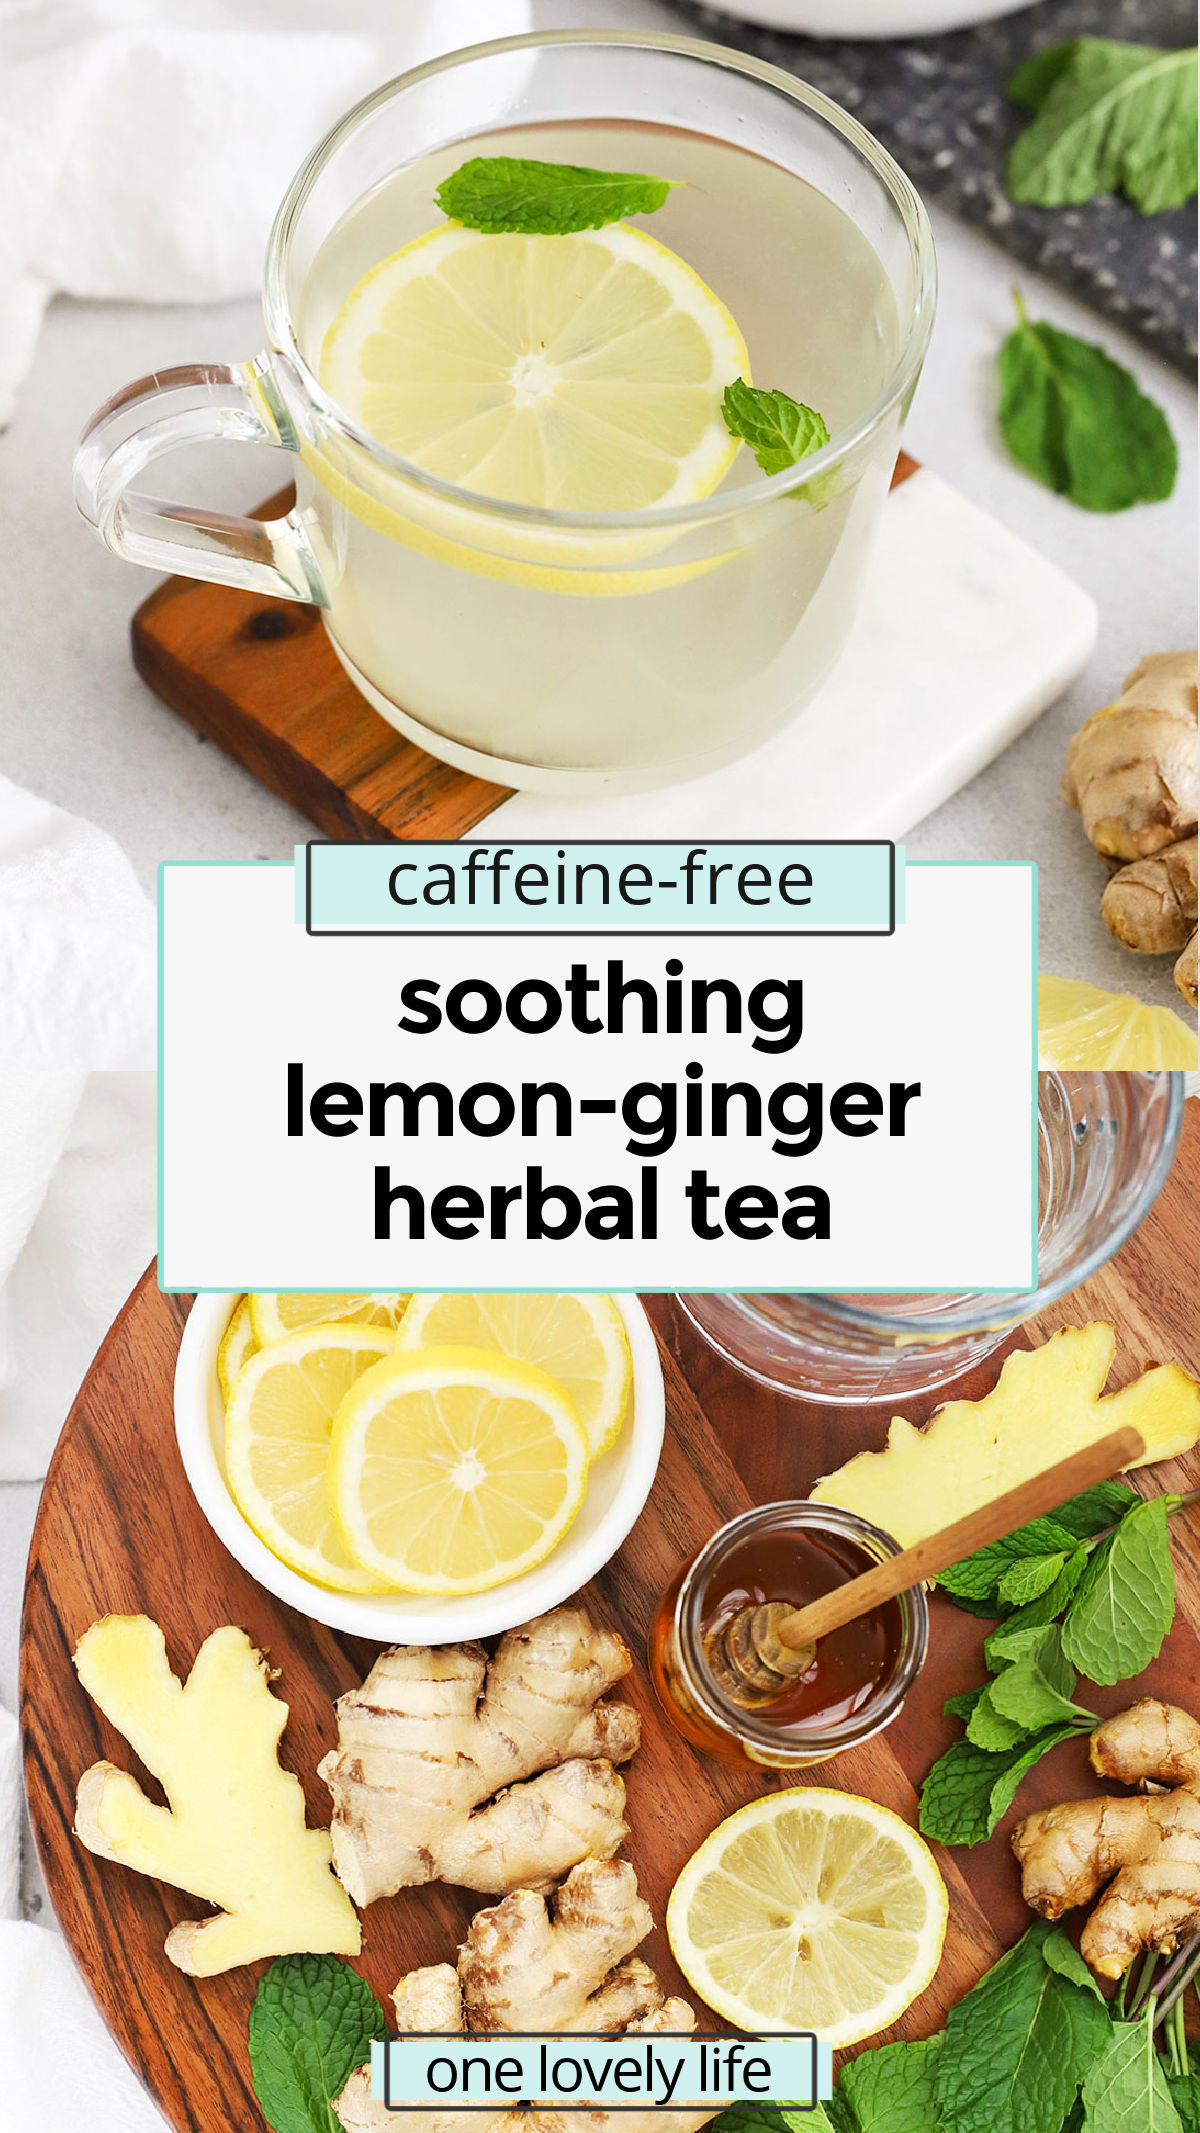 This lemon ginger tea recipe is so cozy when the weather turns cold. You'll love the bright citrus and warm spice from the ginger! / fresh ginger tea recipe / lemon ginger herbal tea / DIY herbal tea / ginger lemon tea recipe / warm drinks / healthy drinks / healthy hot drinks / healthy drink recipe / homemade ginger lemon tea / homemade ginger tea / fresh lemon ginger tea